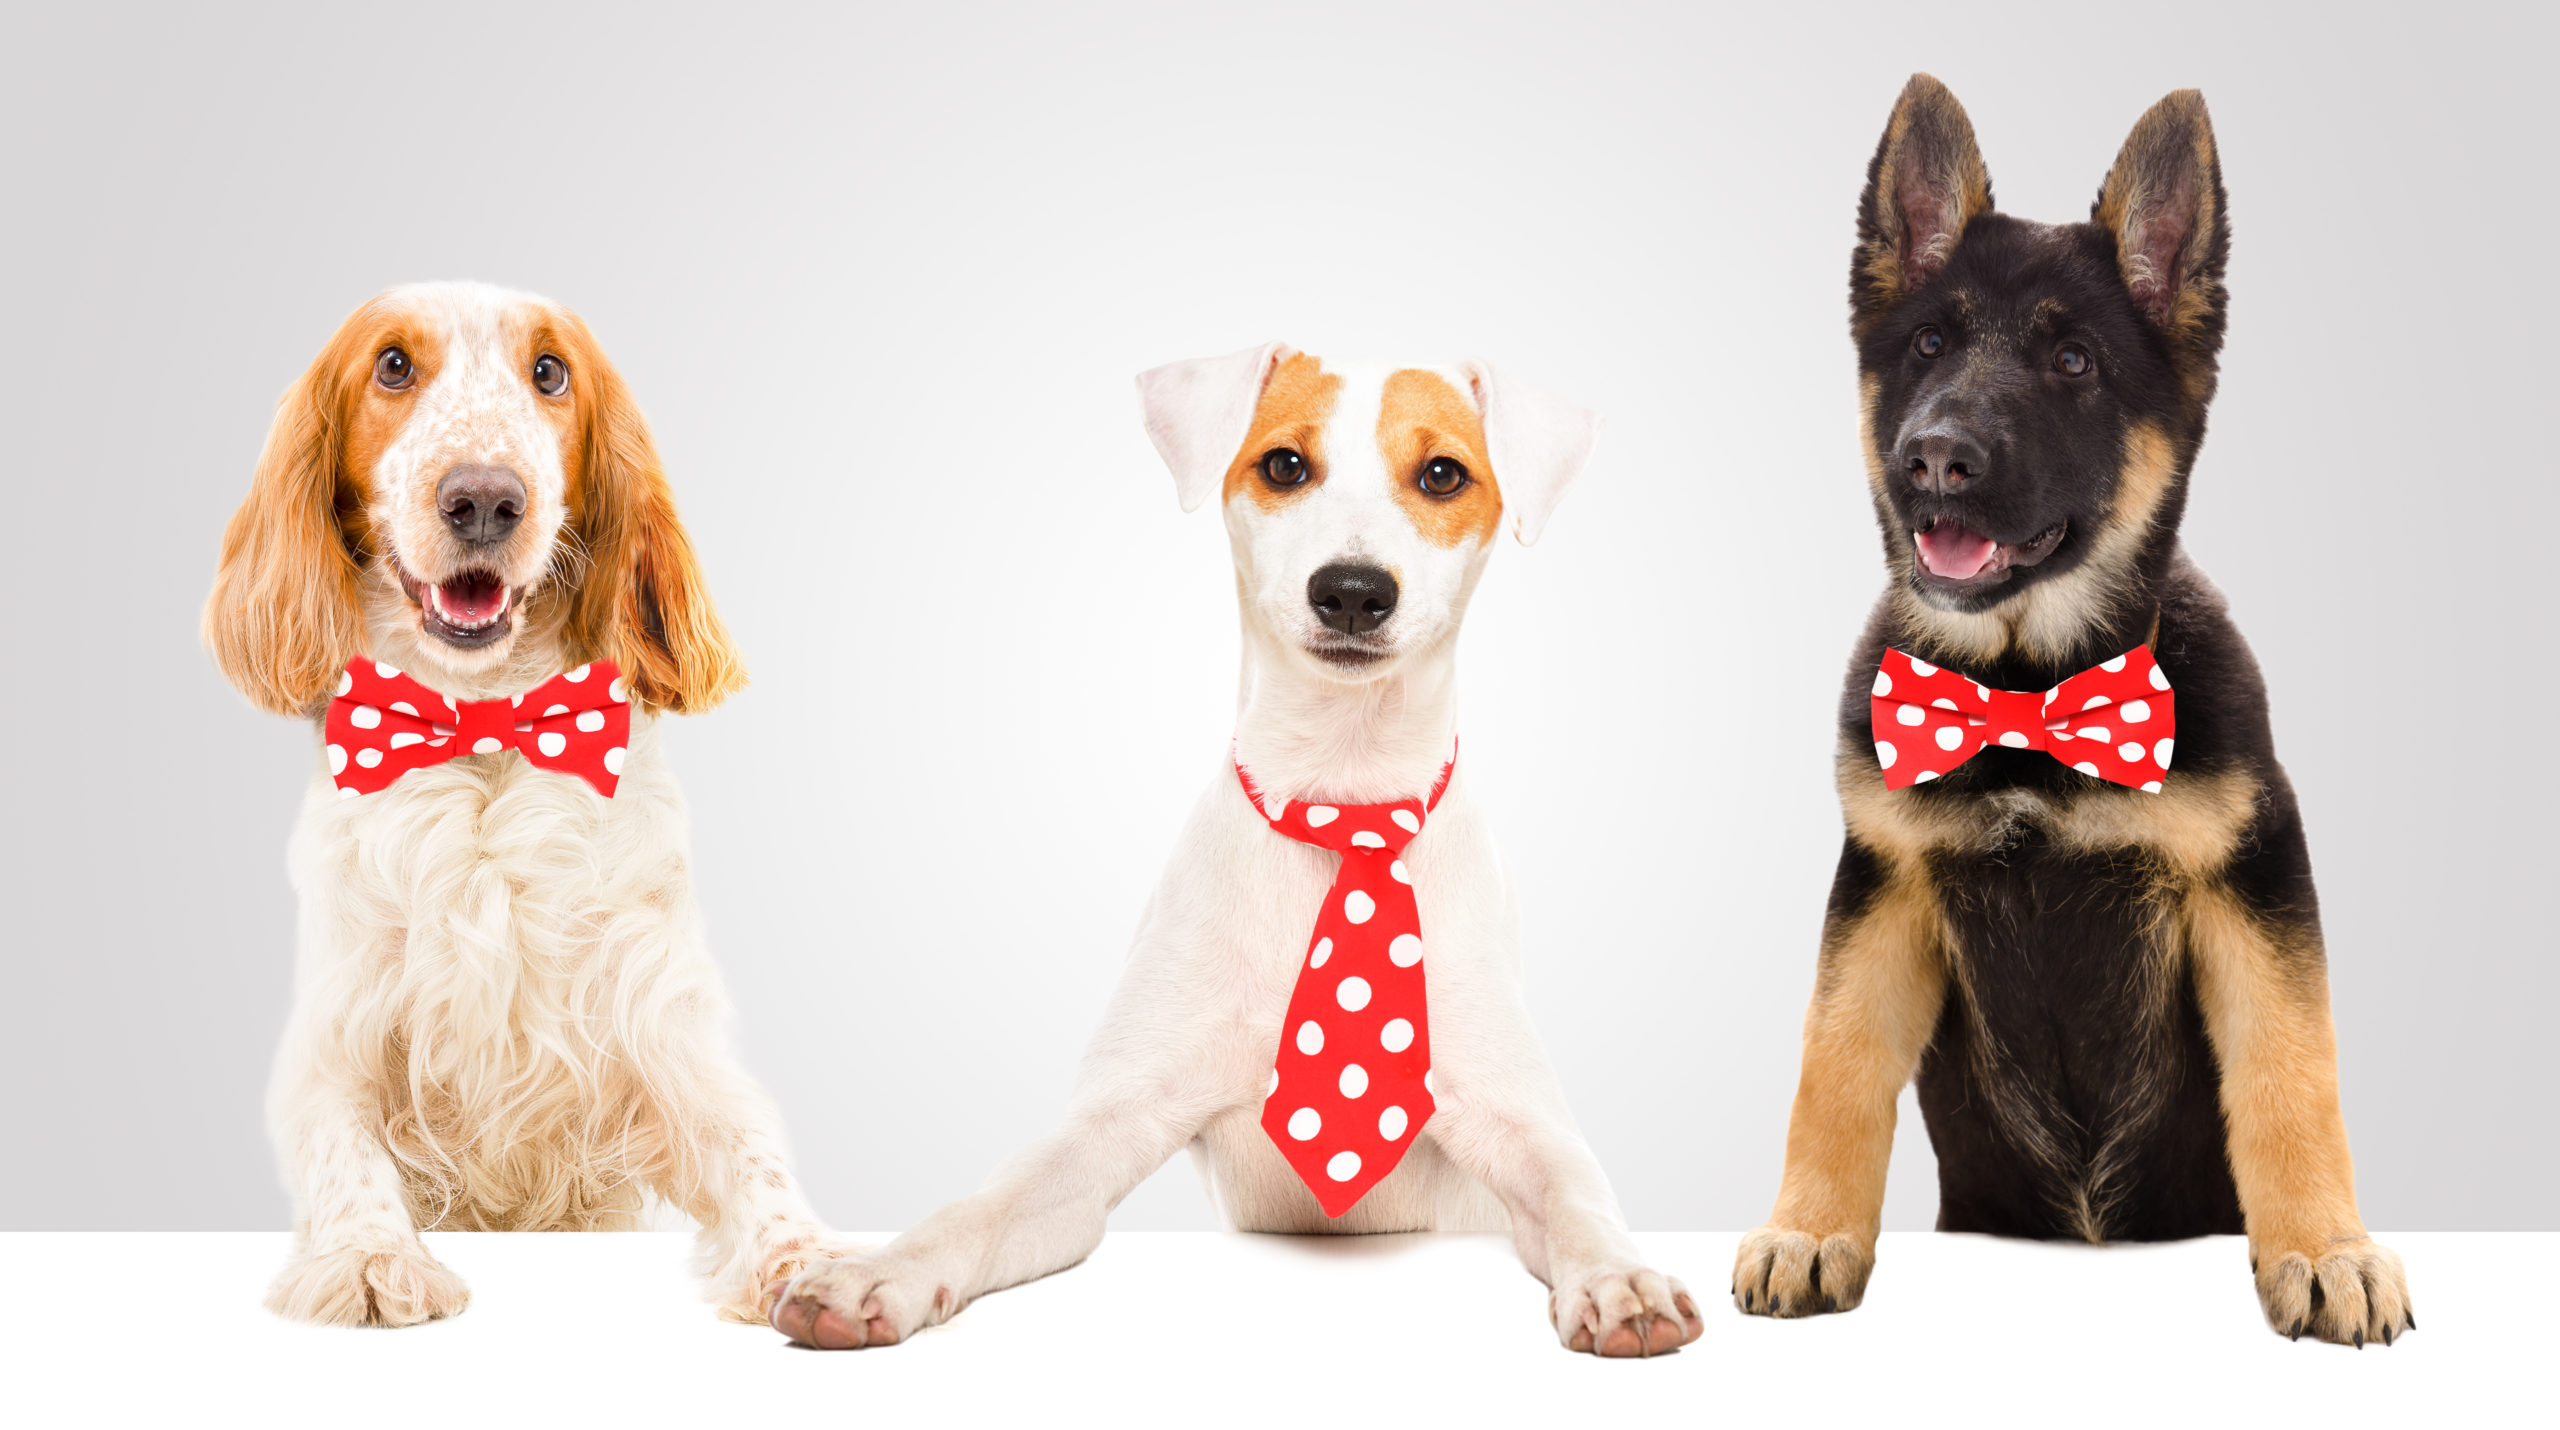 puppies wearing red and white polka dot ties sit at a table